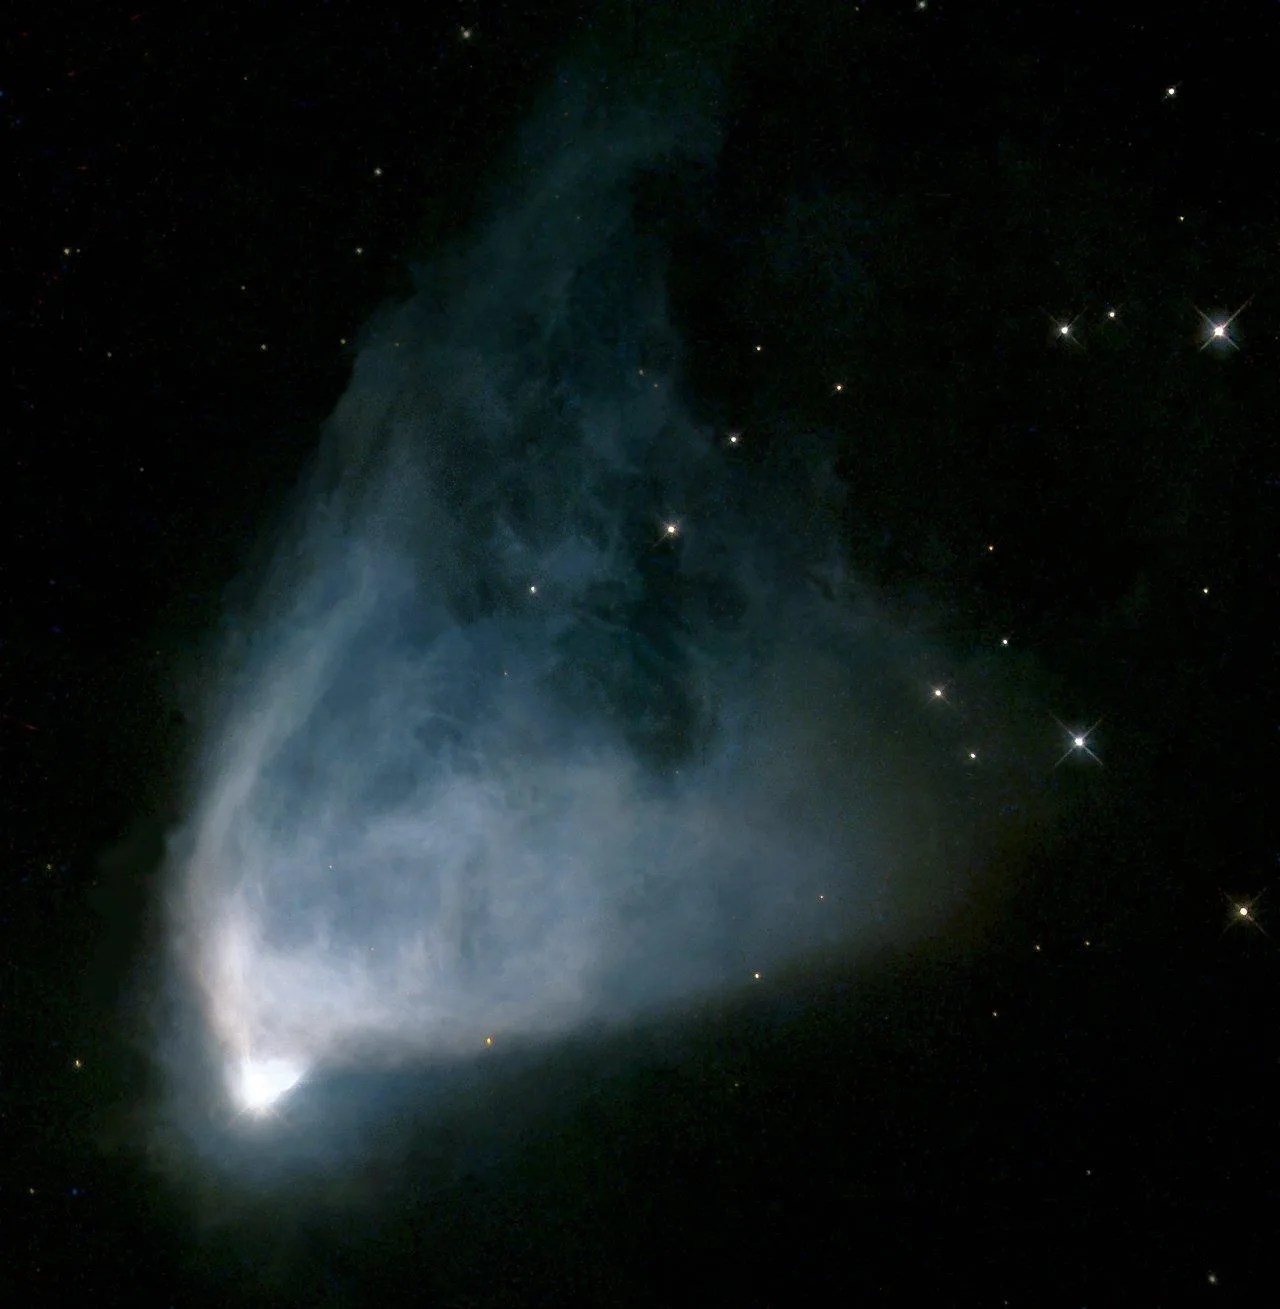 This nebula is shaped like a fan, with the star glowing white in the bottom left. Trailing upwards away from it, like a veil, the gas and dust is bluish-white closest to the star, then turns to a light blue farther away, and then to a deep turquoise at the ends, which are on the top right.